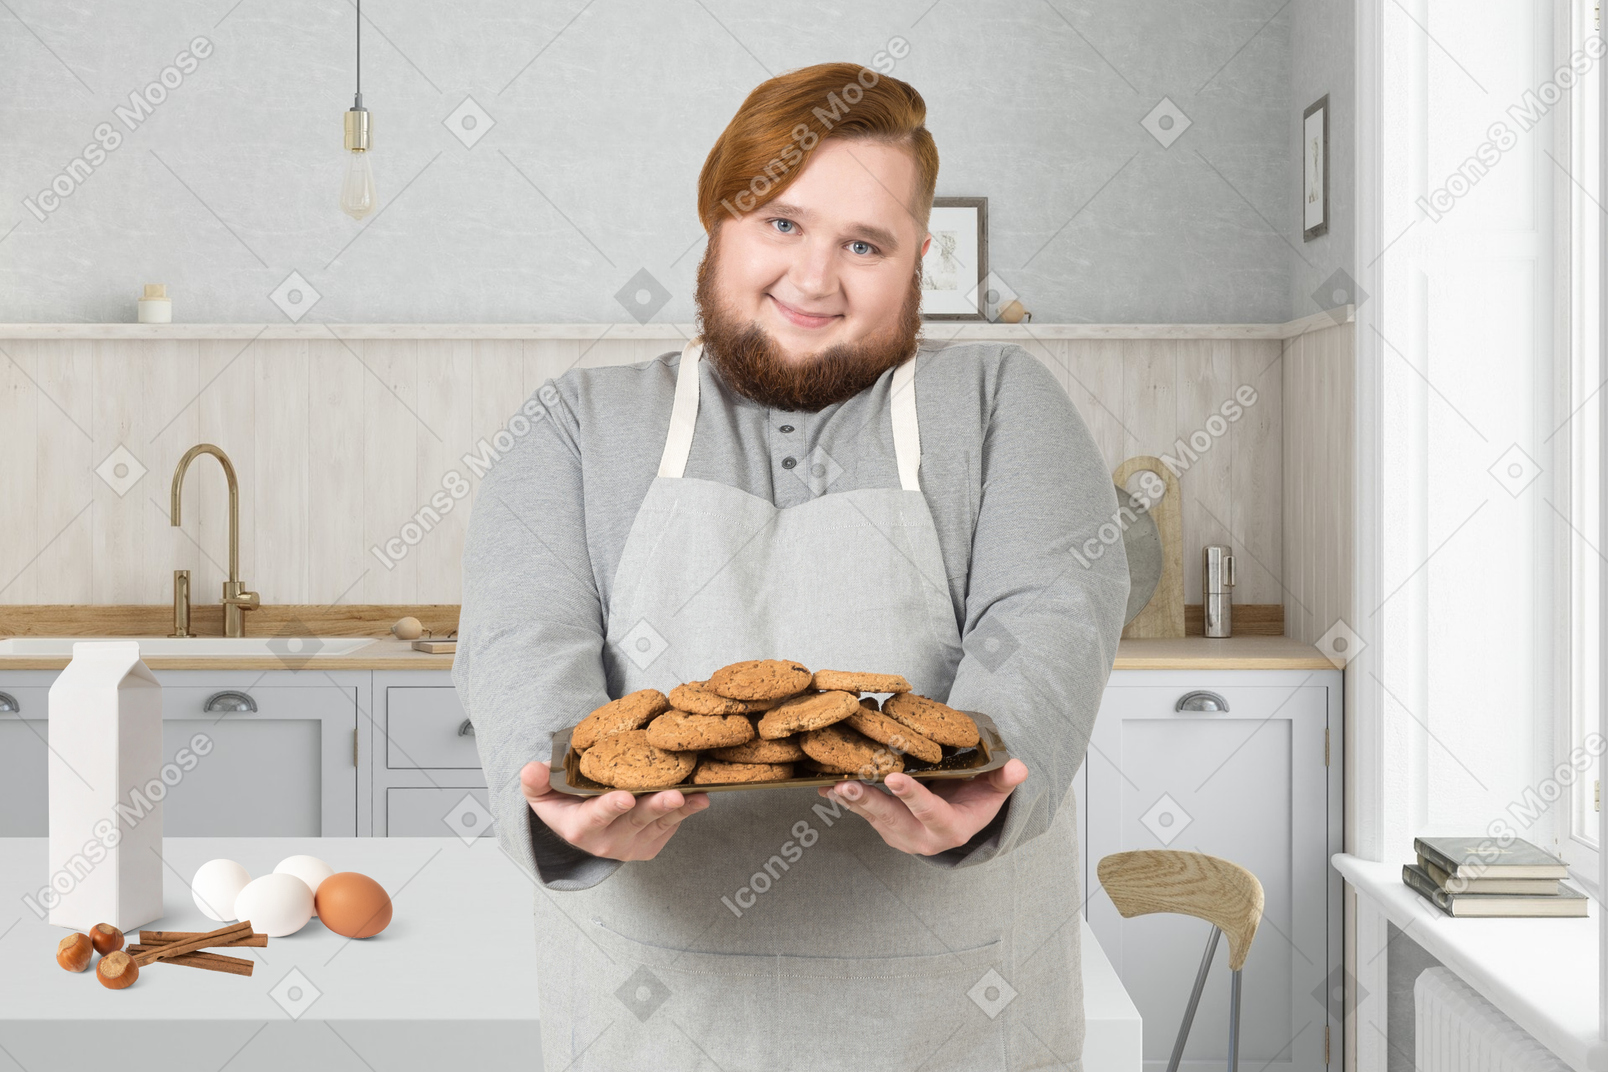 A man holding a plate of cookies in a kitchen